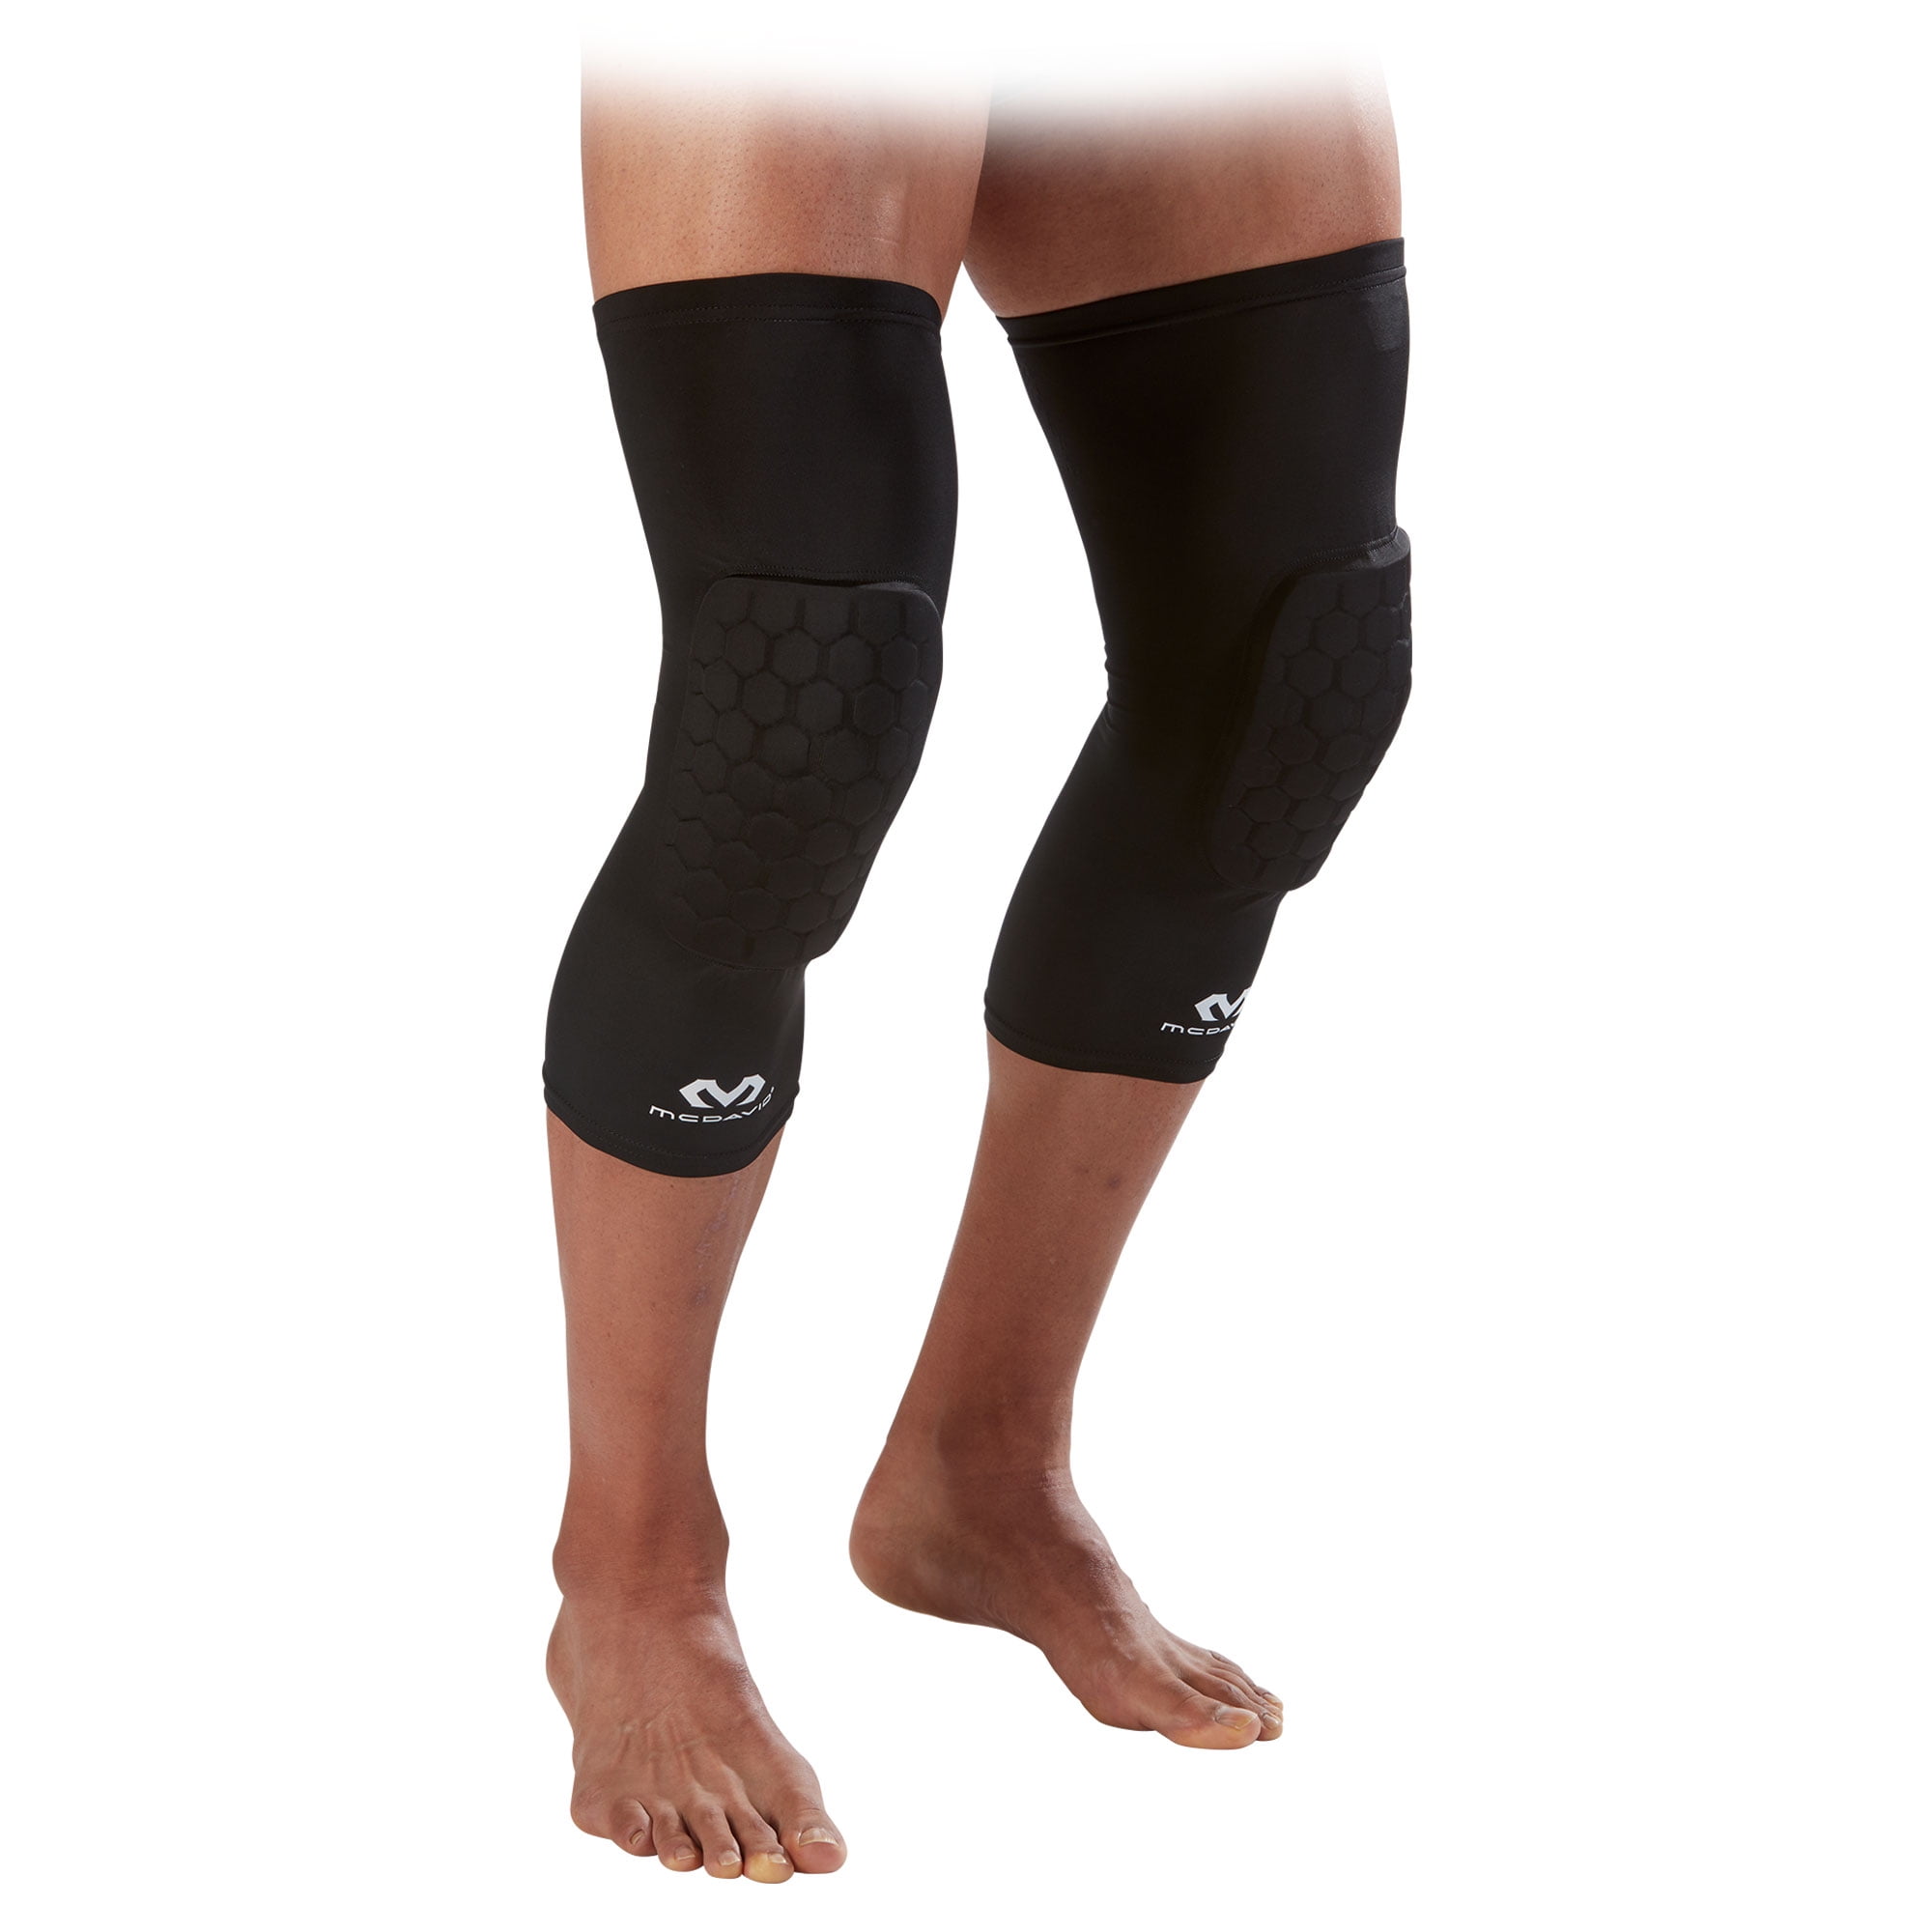 McDavid 10020 Compression 3/4 Length Tight with Knee Support, Black